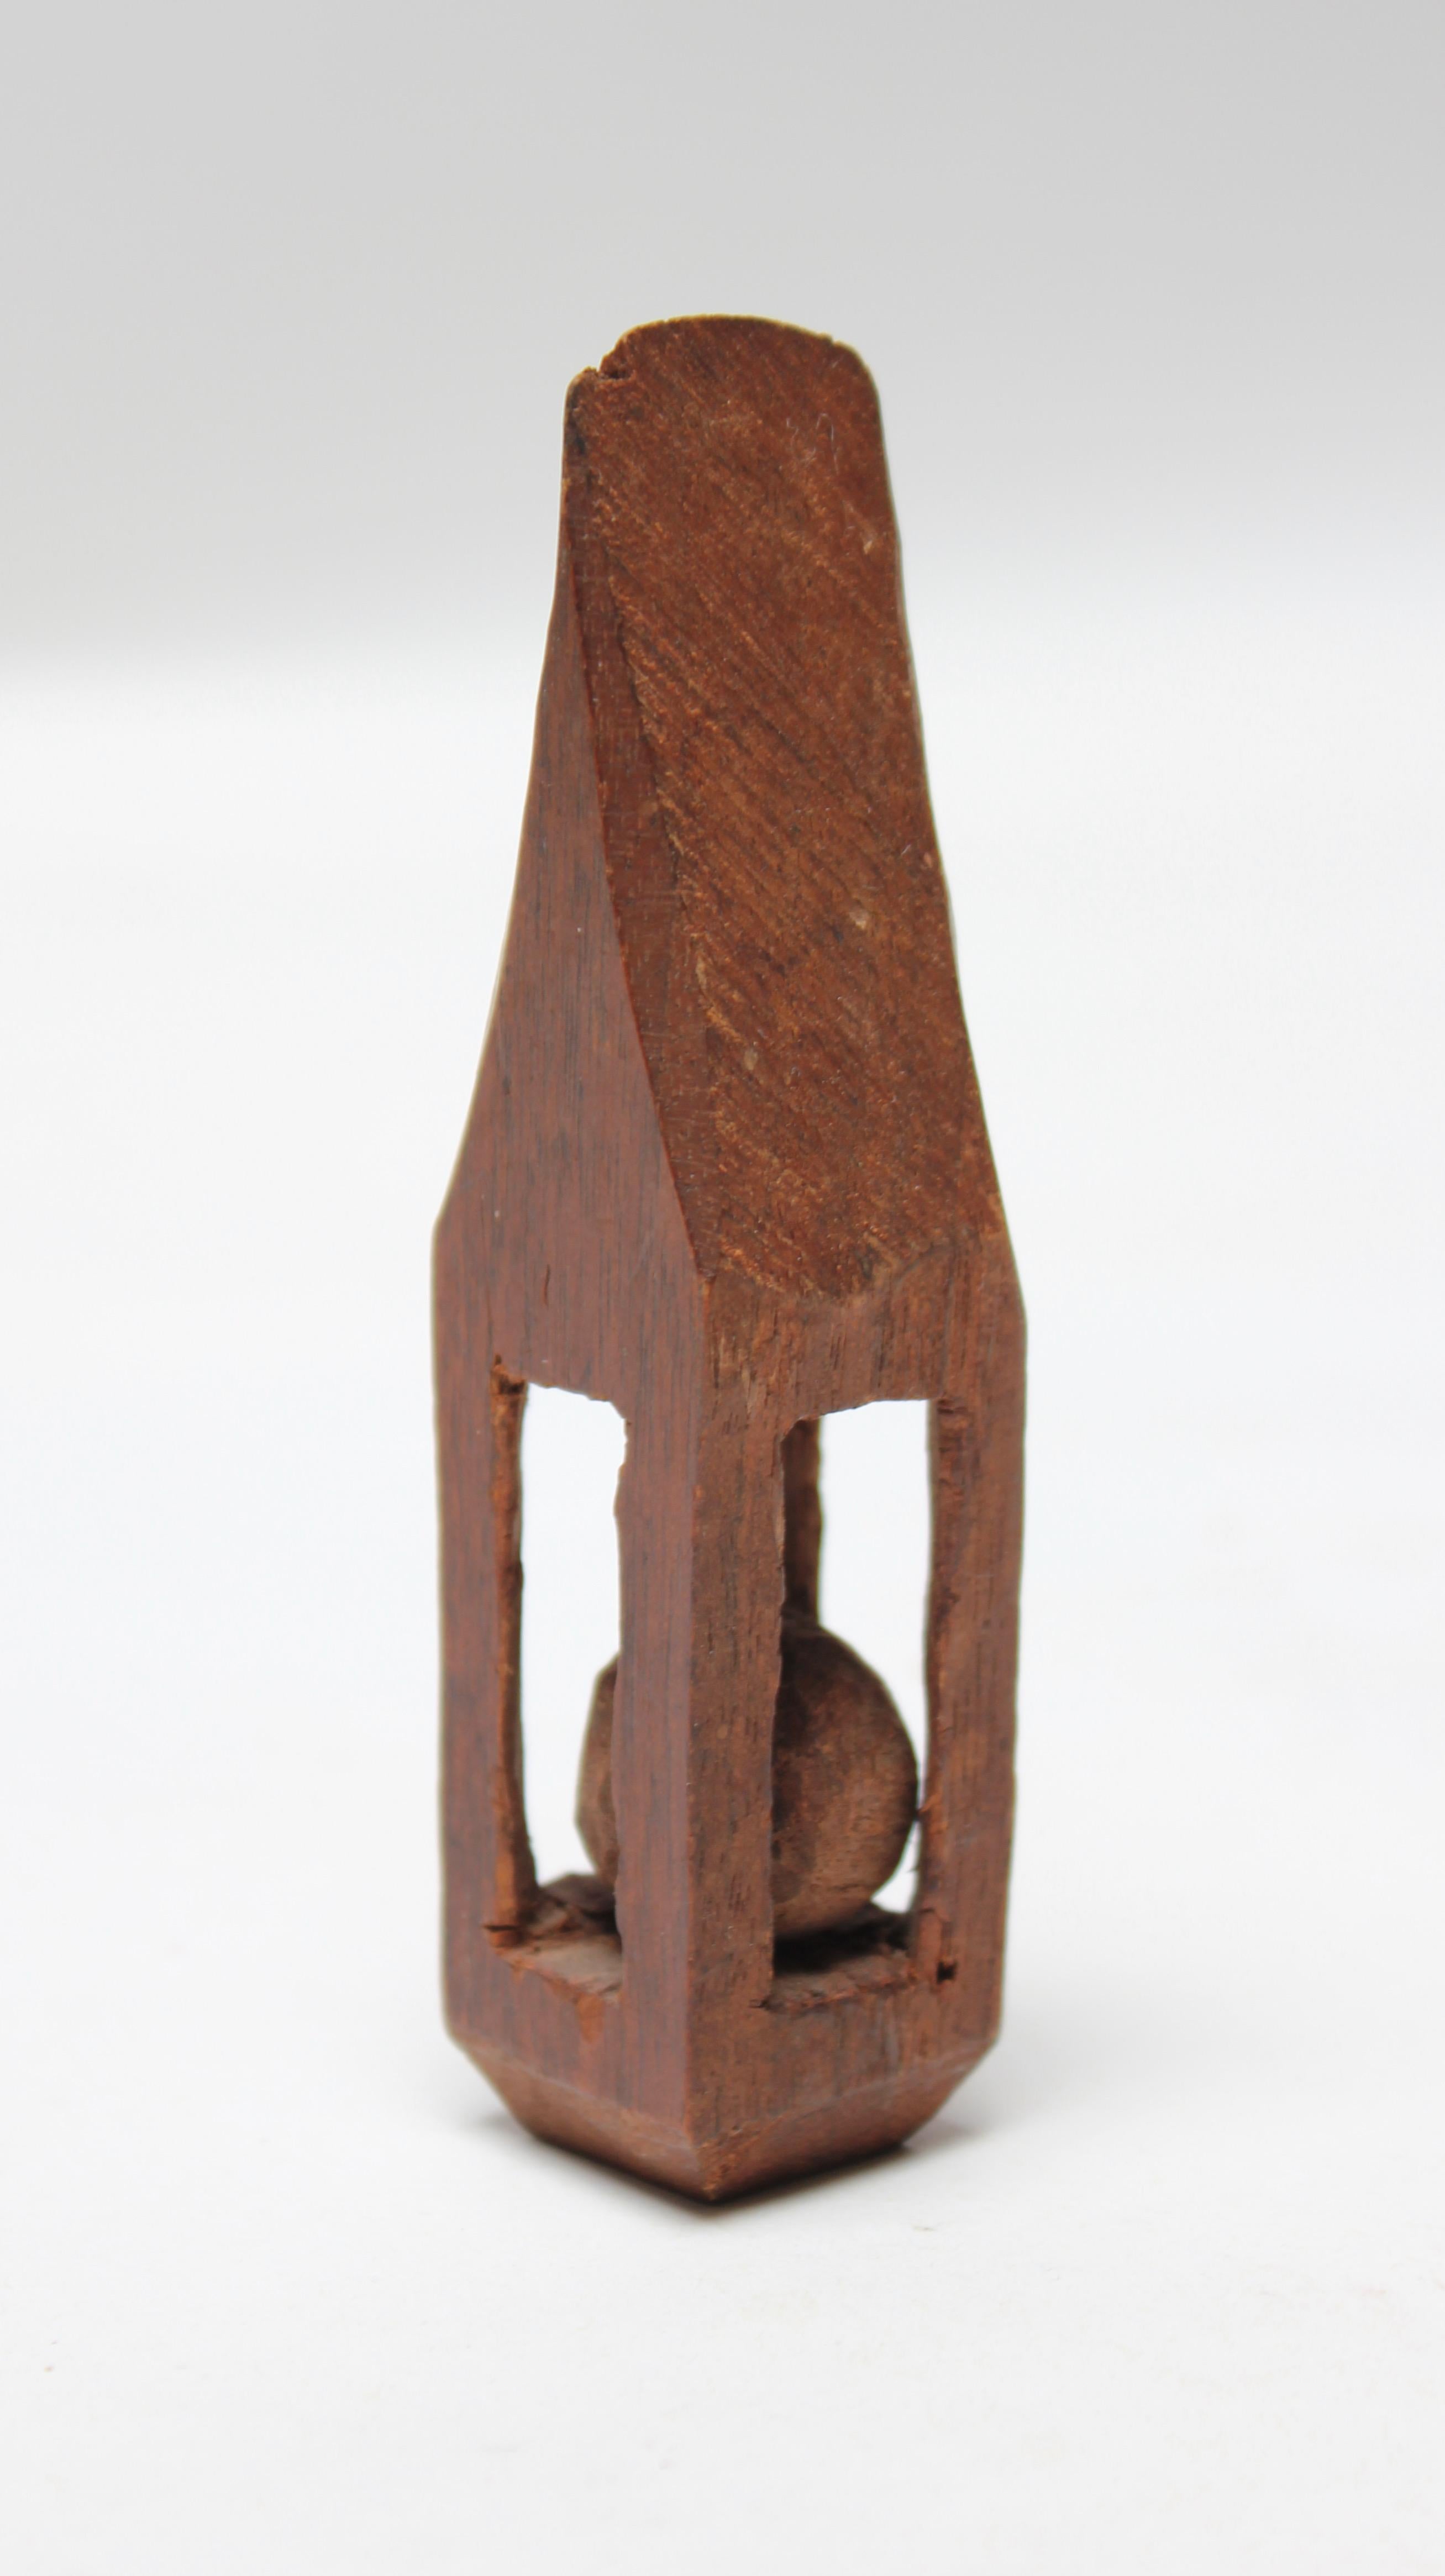 Circa 1910 trench art whimsy figure composed of a ball in cage, all whittled form one piece of wood. Figurines, like this example, were sculpted by soldiers during the war. Good age present (warm patina and one tiny edge loss to the top, as shown).